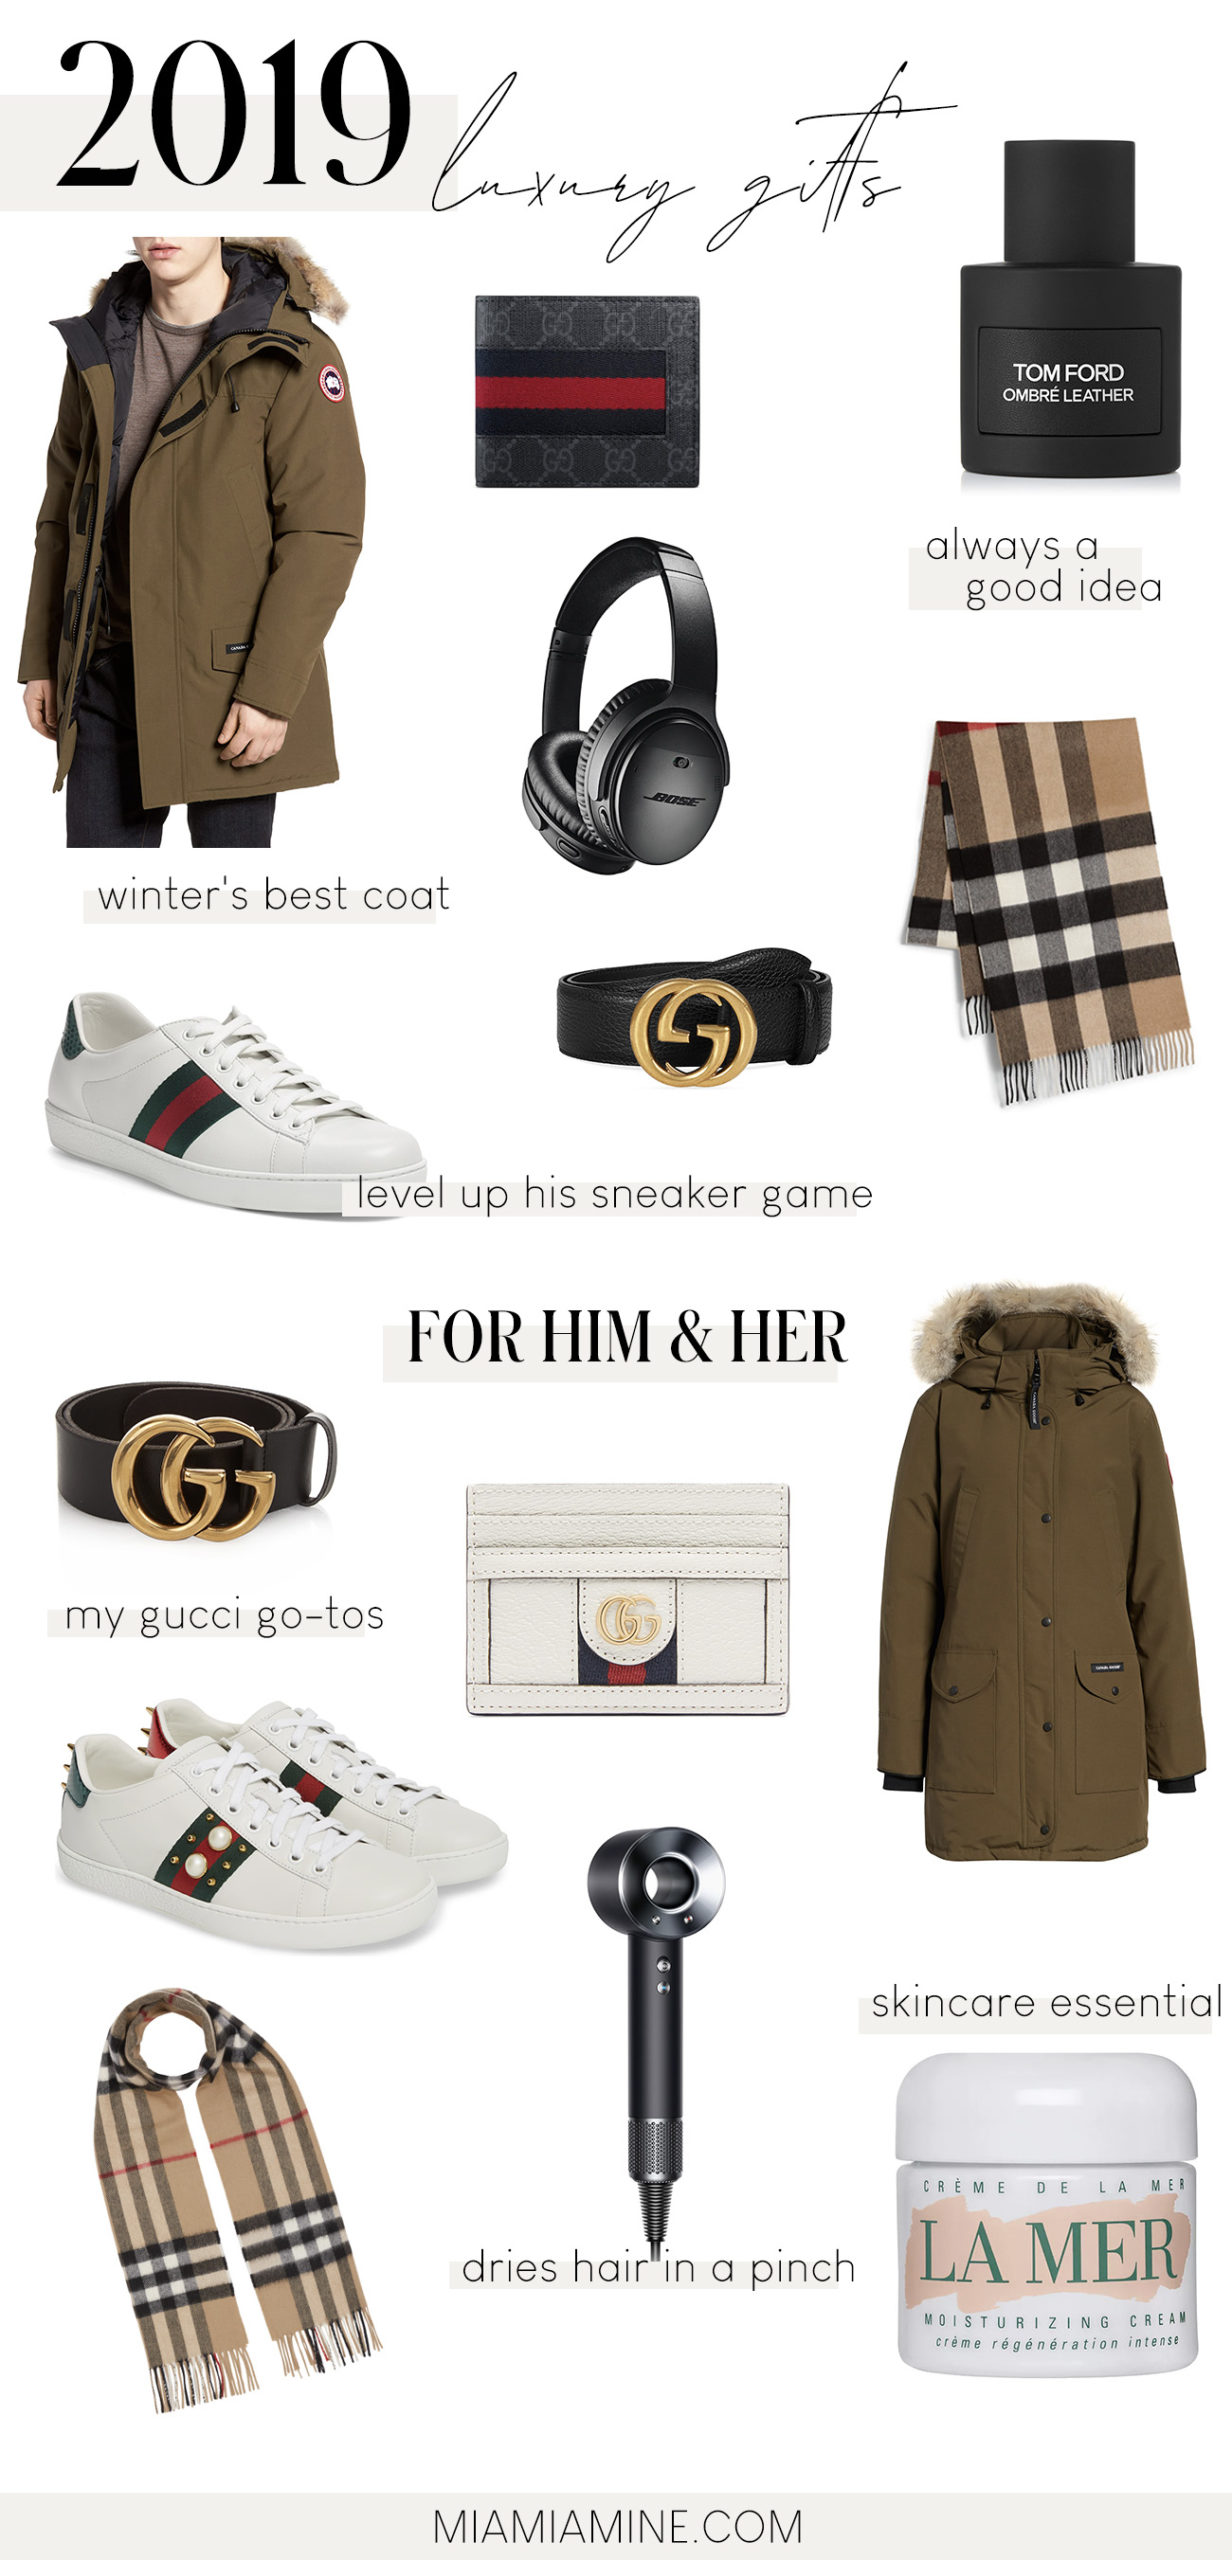 fashion blogger mia mia mine shares her luxury gift guide for him and her 2019